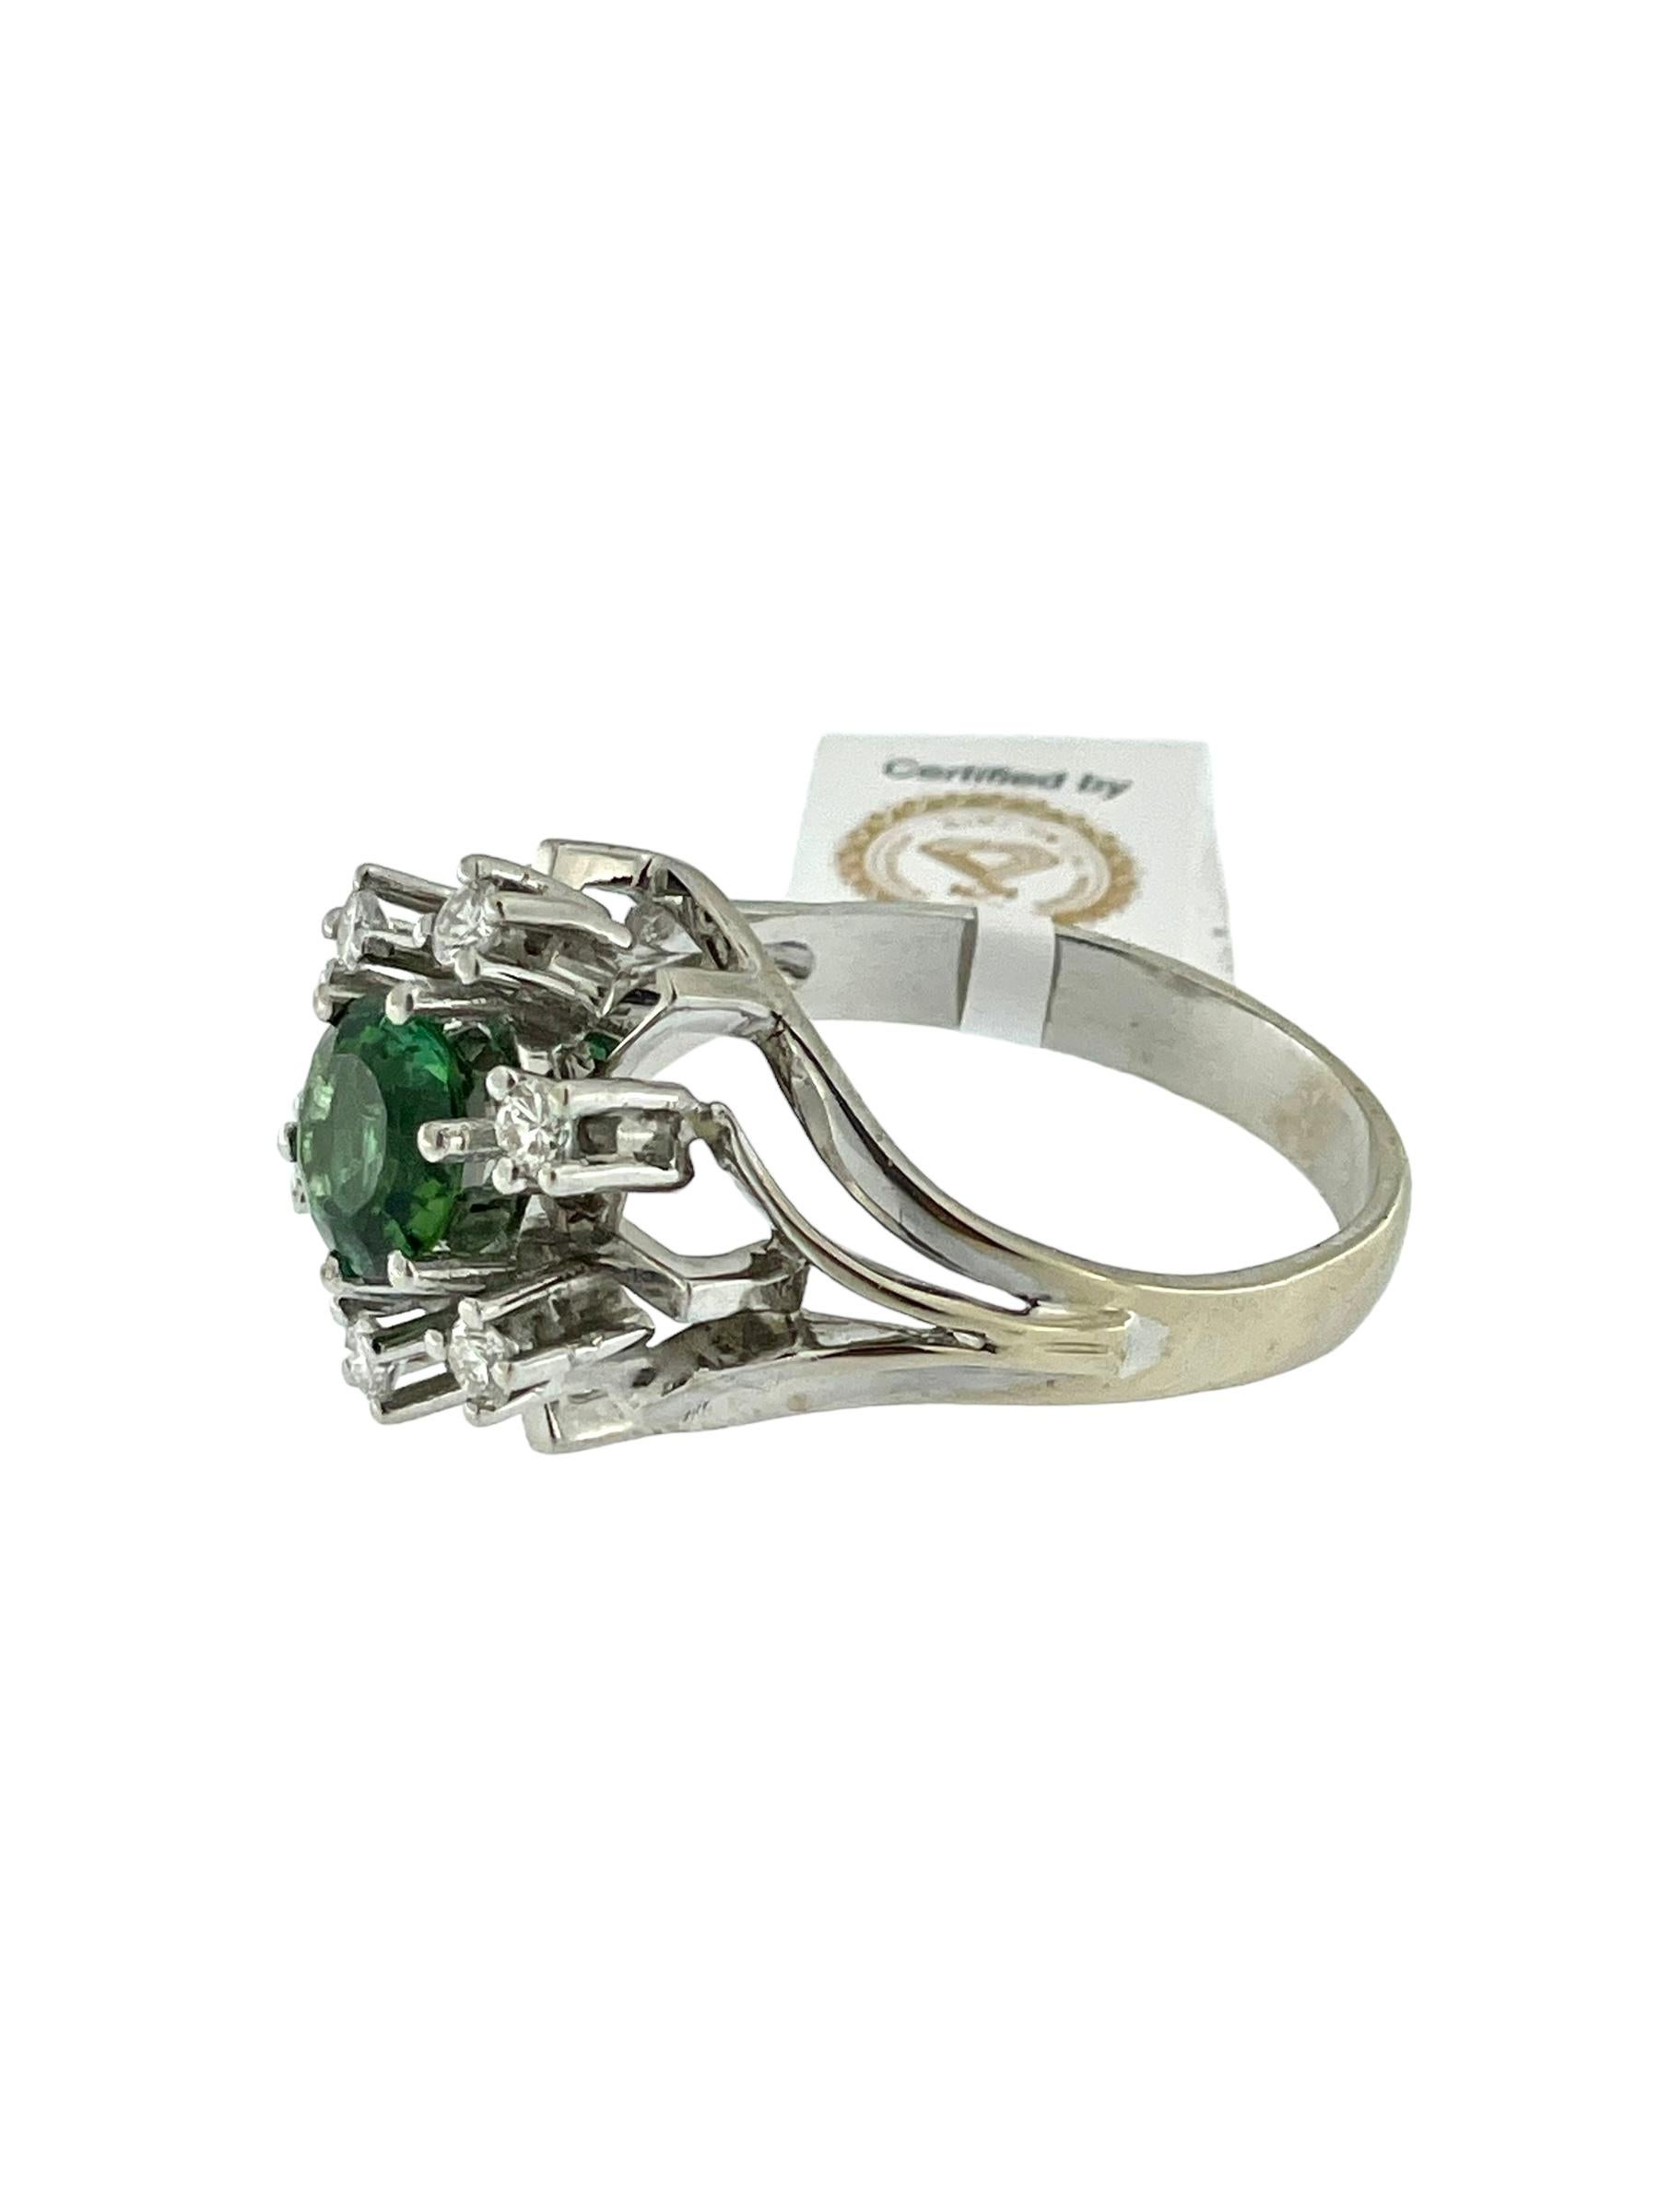 IGI Certified White Gold Ring with Verdelite Tourmaline and Diamonds For Sale 1